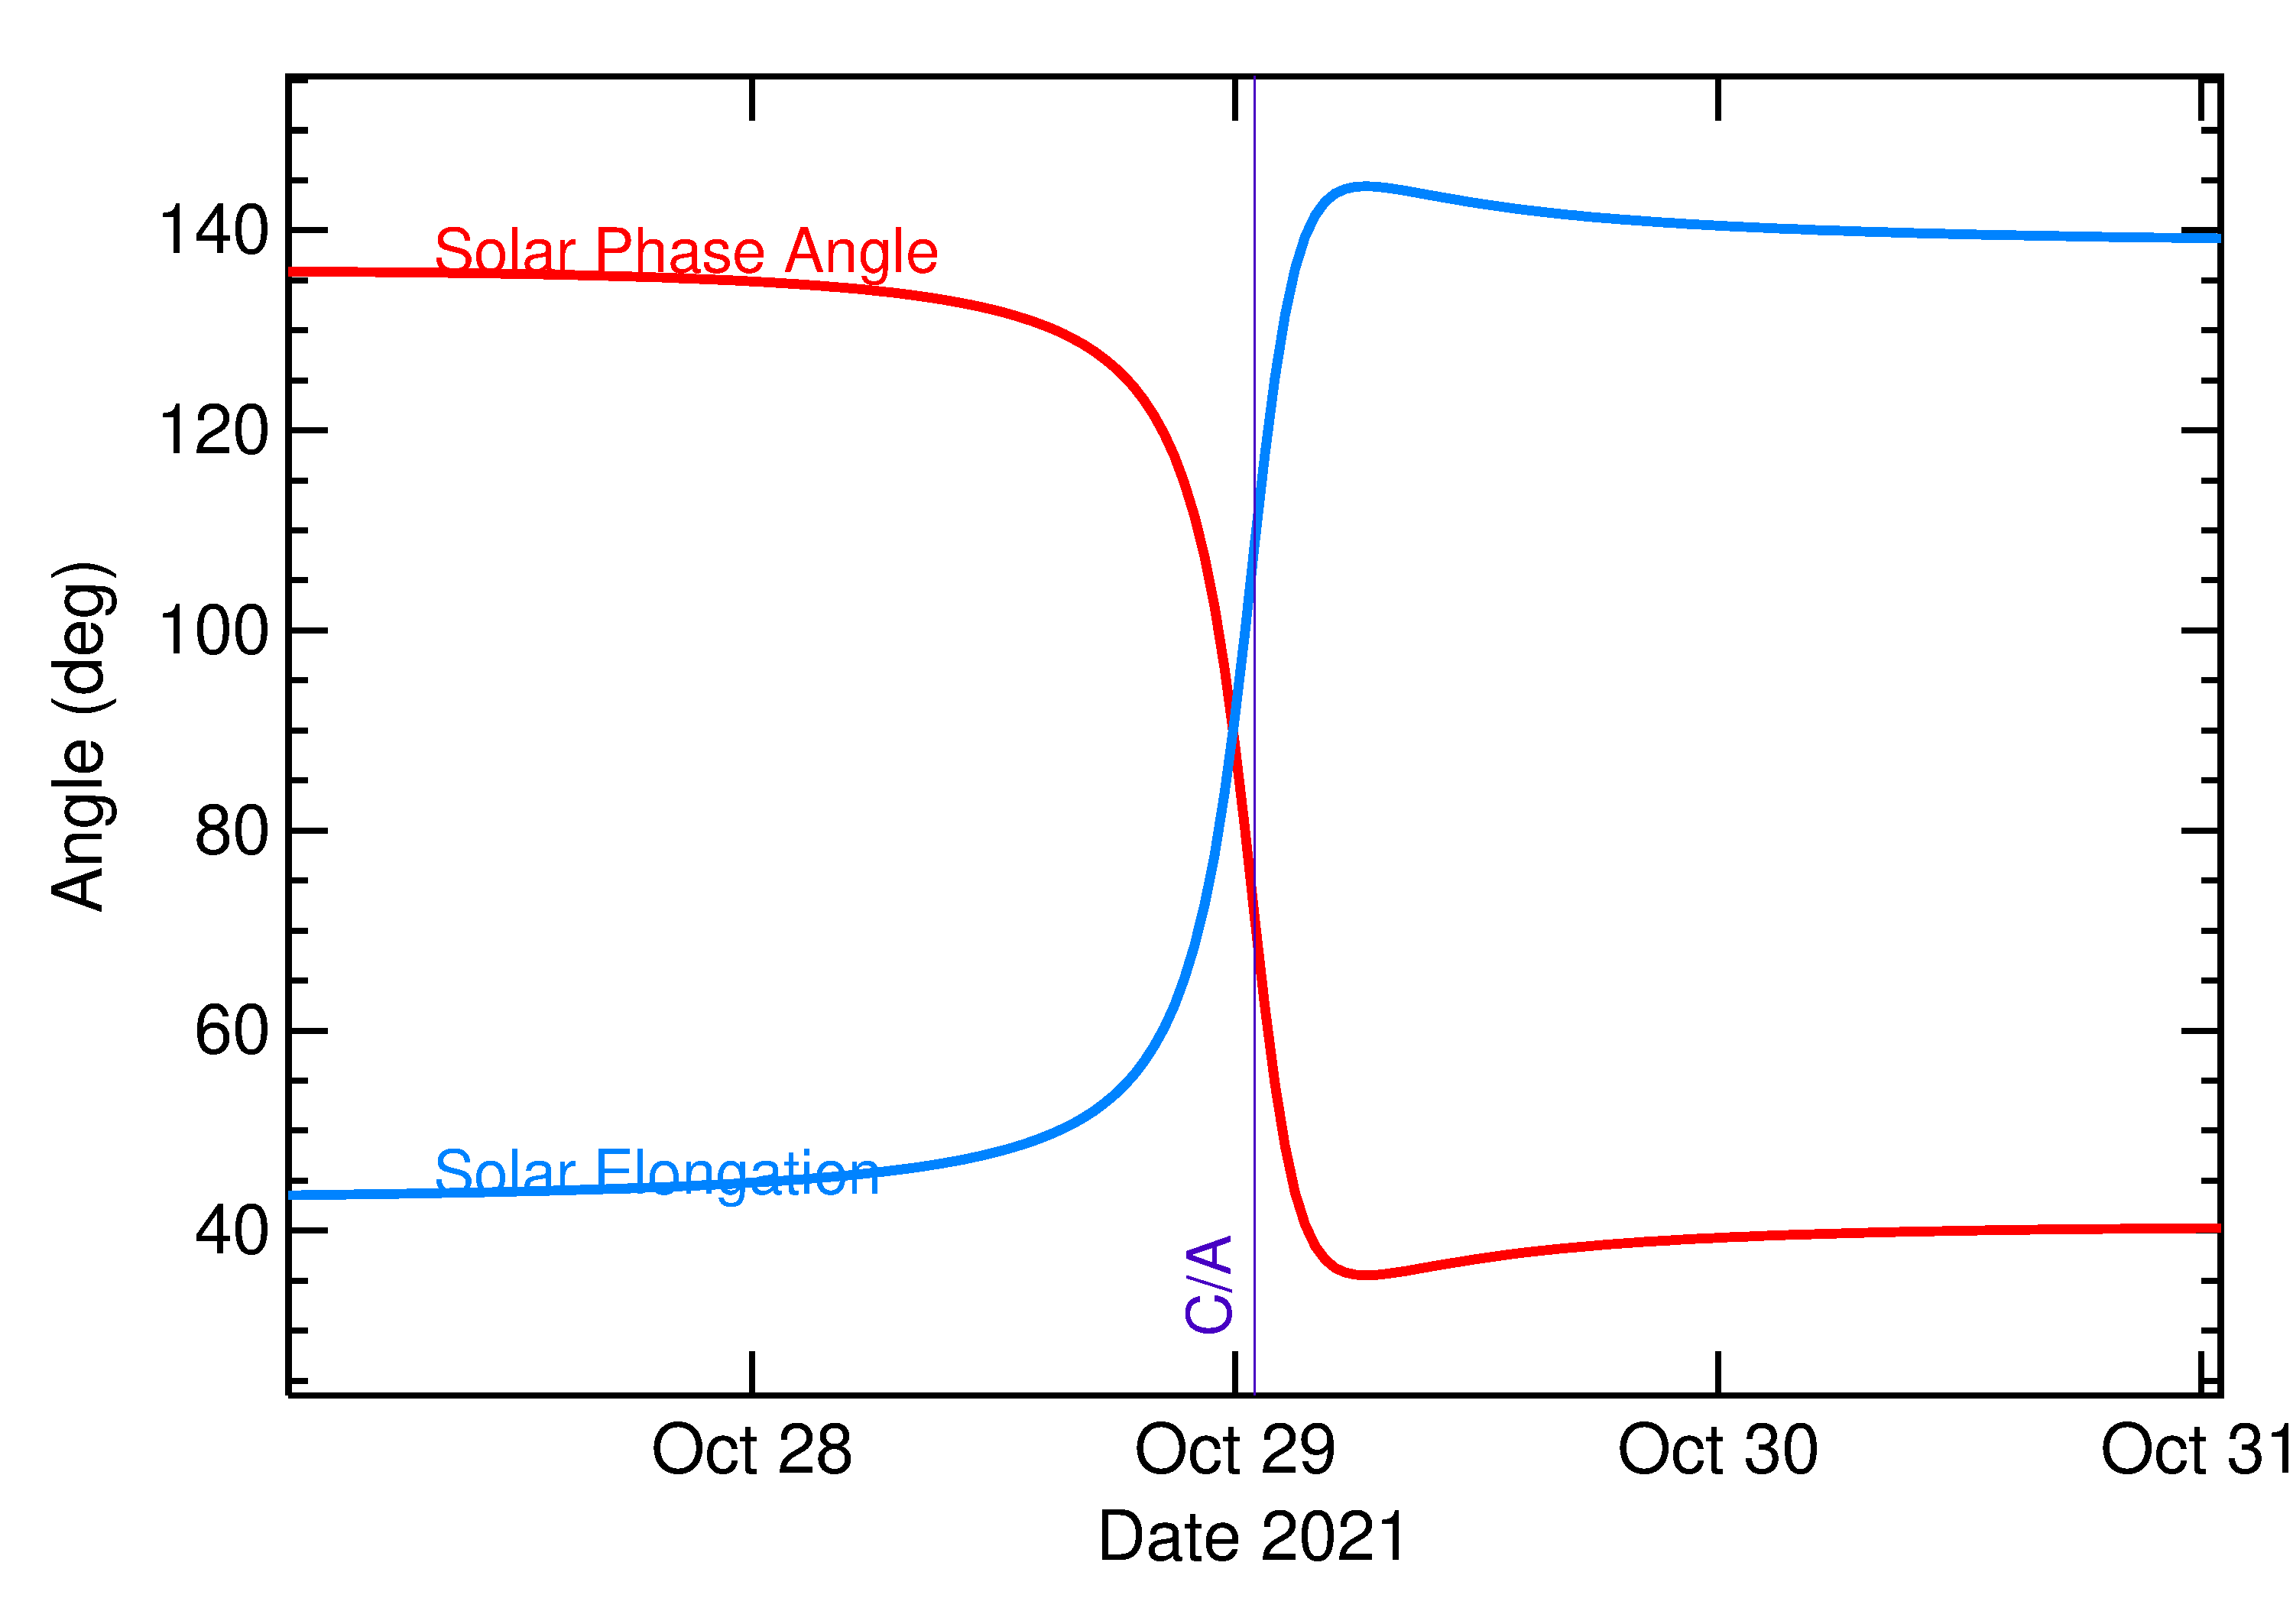 Solar Elongation and Solar Phase Angle of 2021 UV5 in the days around closest approach